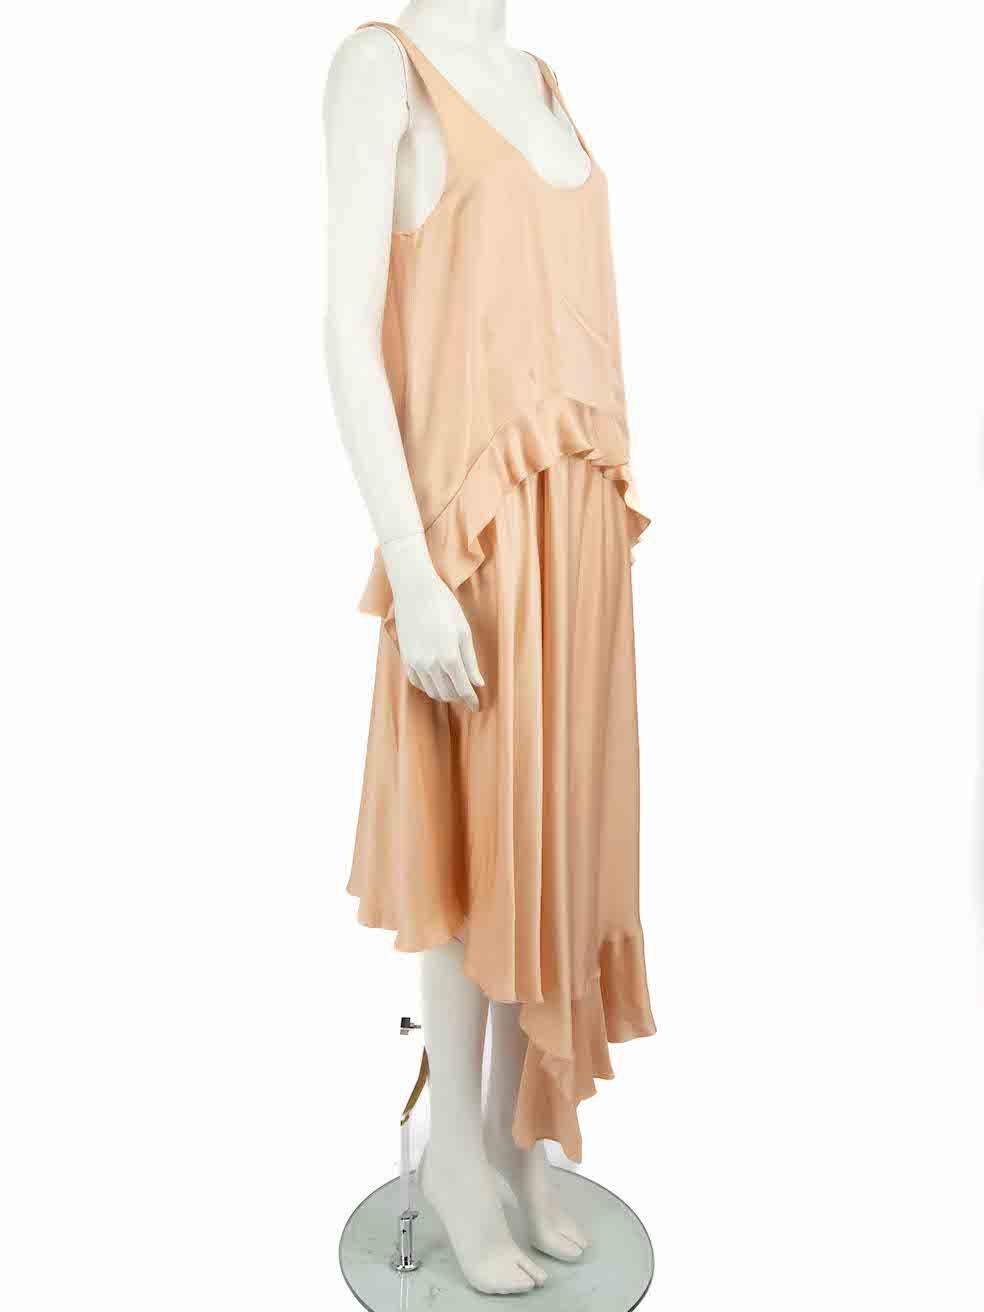 CONDITION is Very good. Minimal wear to dress is evident. Minimal wear to the rear with a pull to the weave and a discoloured mark to the neckline lining on this used Stella McCartney designer resale item.
 
 
 
 Details
 
 
 Pink
 
 Silk
 
 Midi